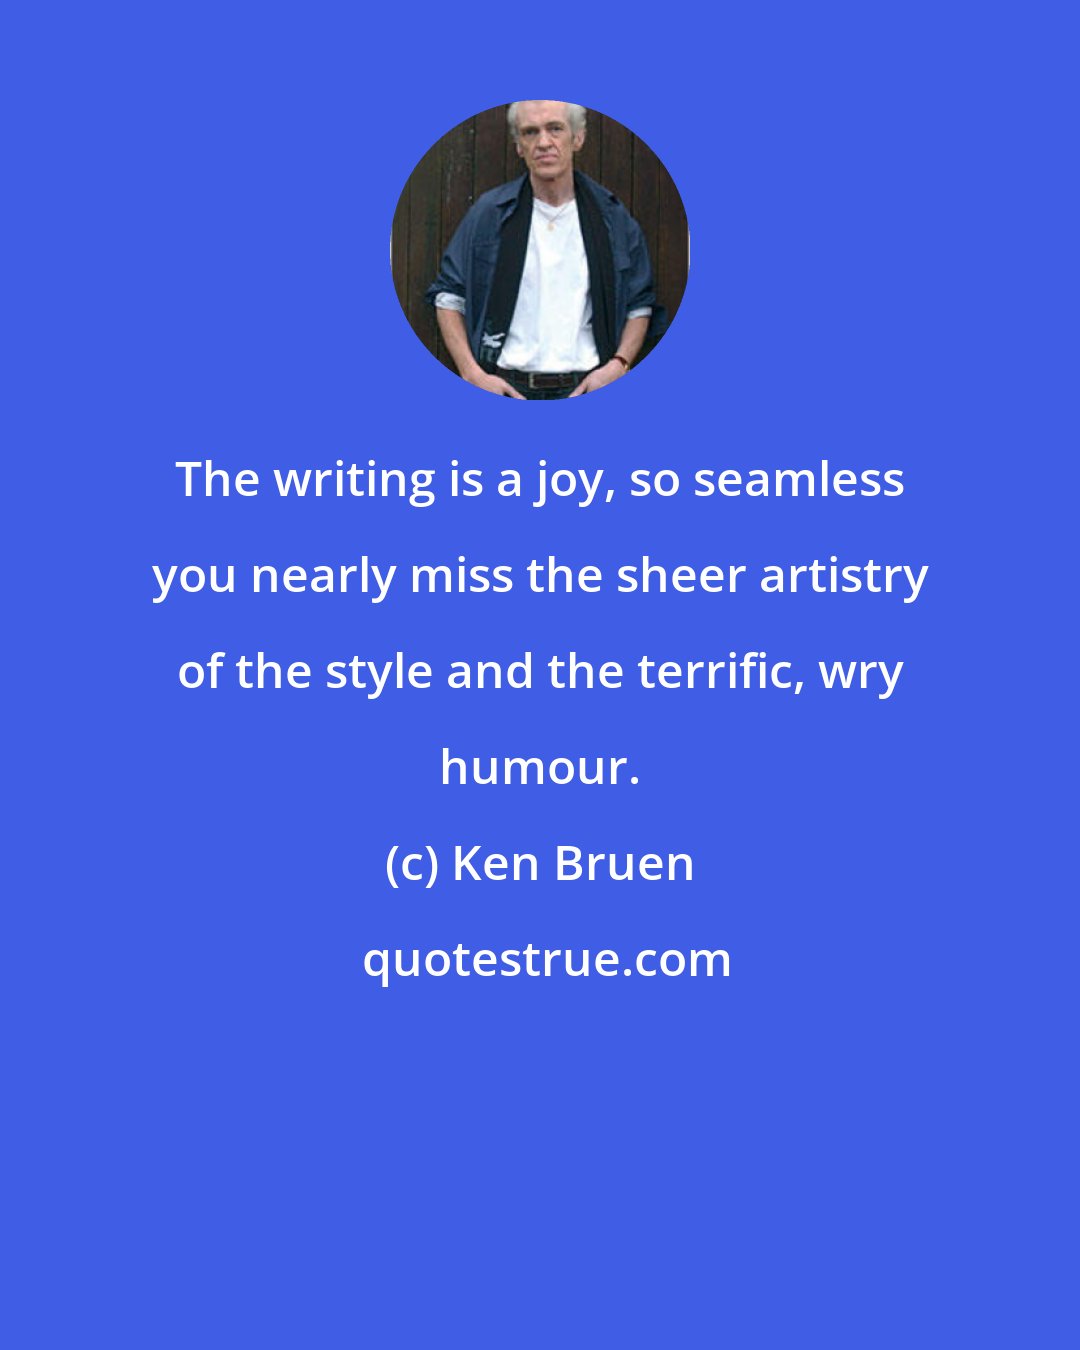 Ken Bruen: The writing is a joy, so seamless you nearly miss the sheer artistry of the style and the terrific, wry humour.